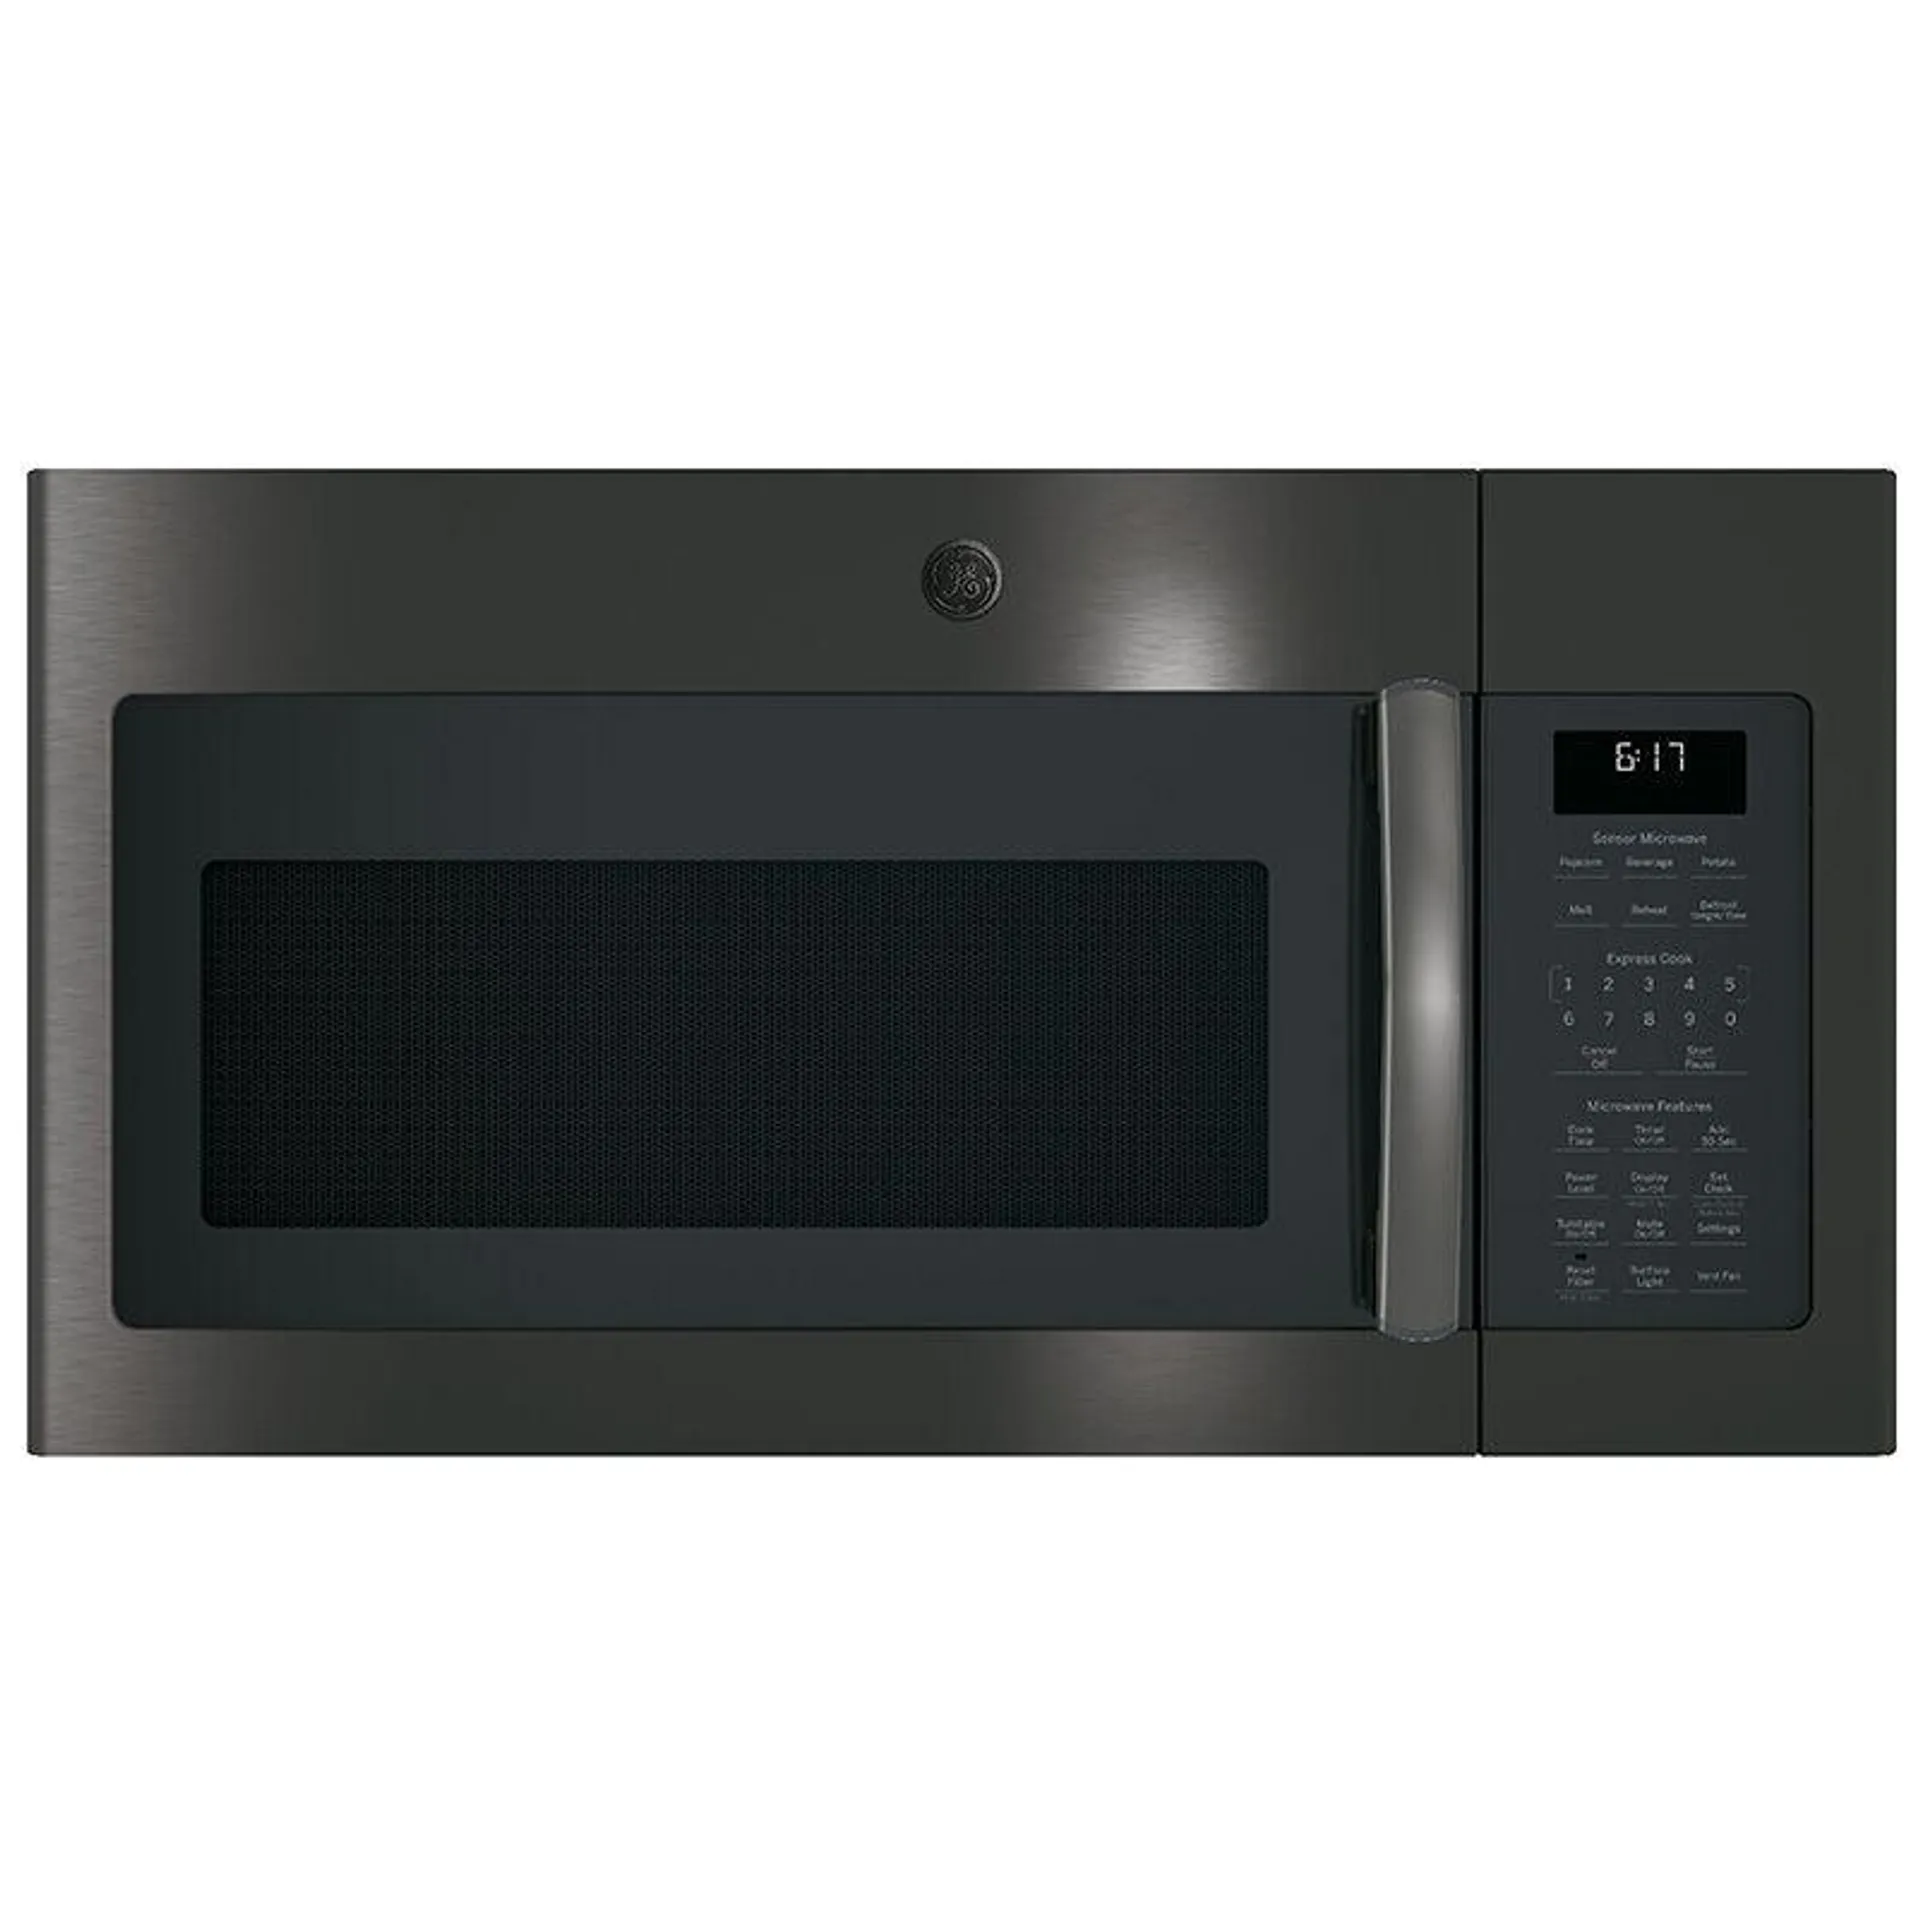 GE 30" 1.7 Cu. Ft. Over-the-Range Microwave with 10 Power Levels, 300 CFM & Sensor Cooking Controls - Black Stainless